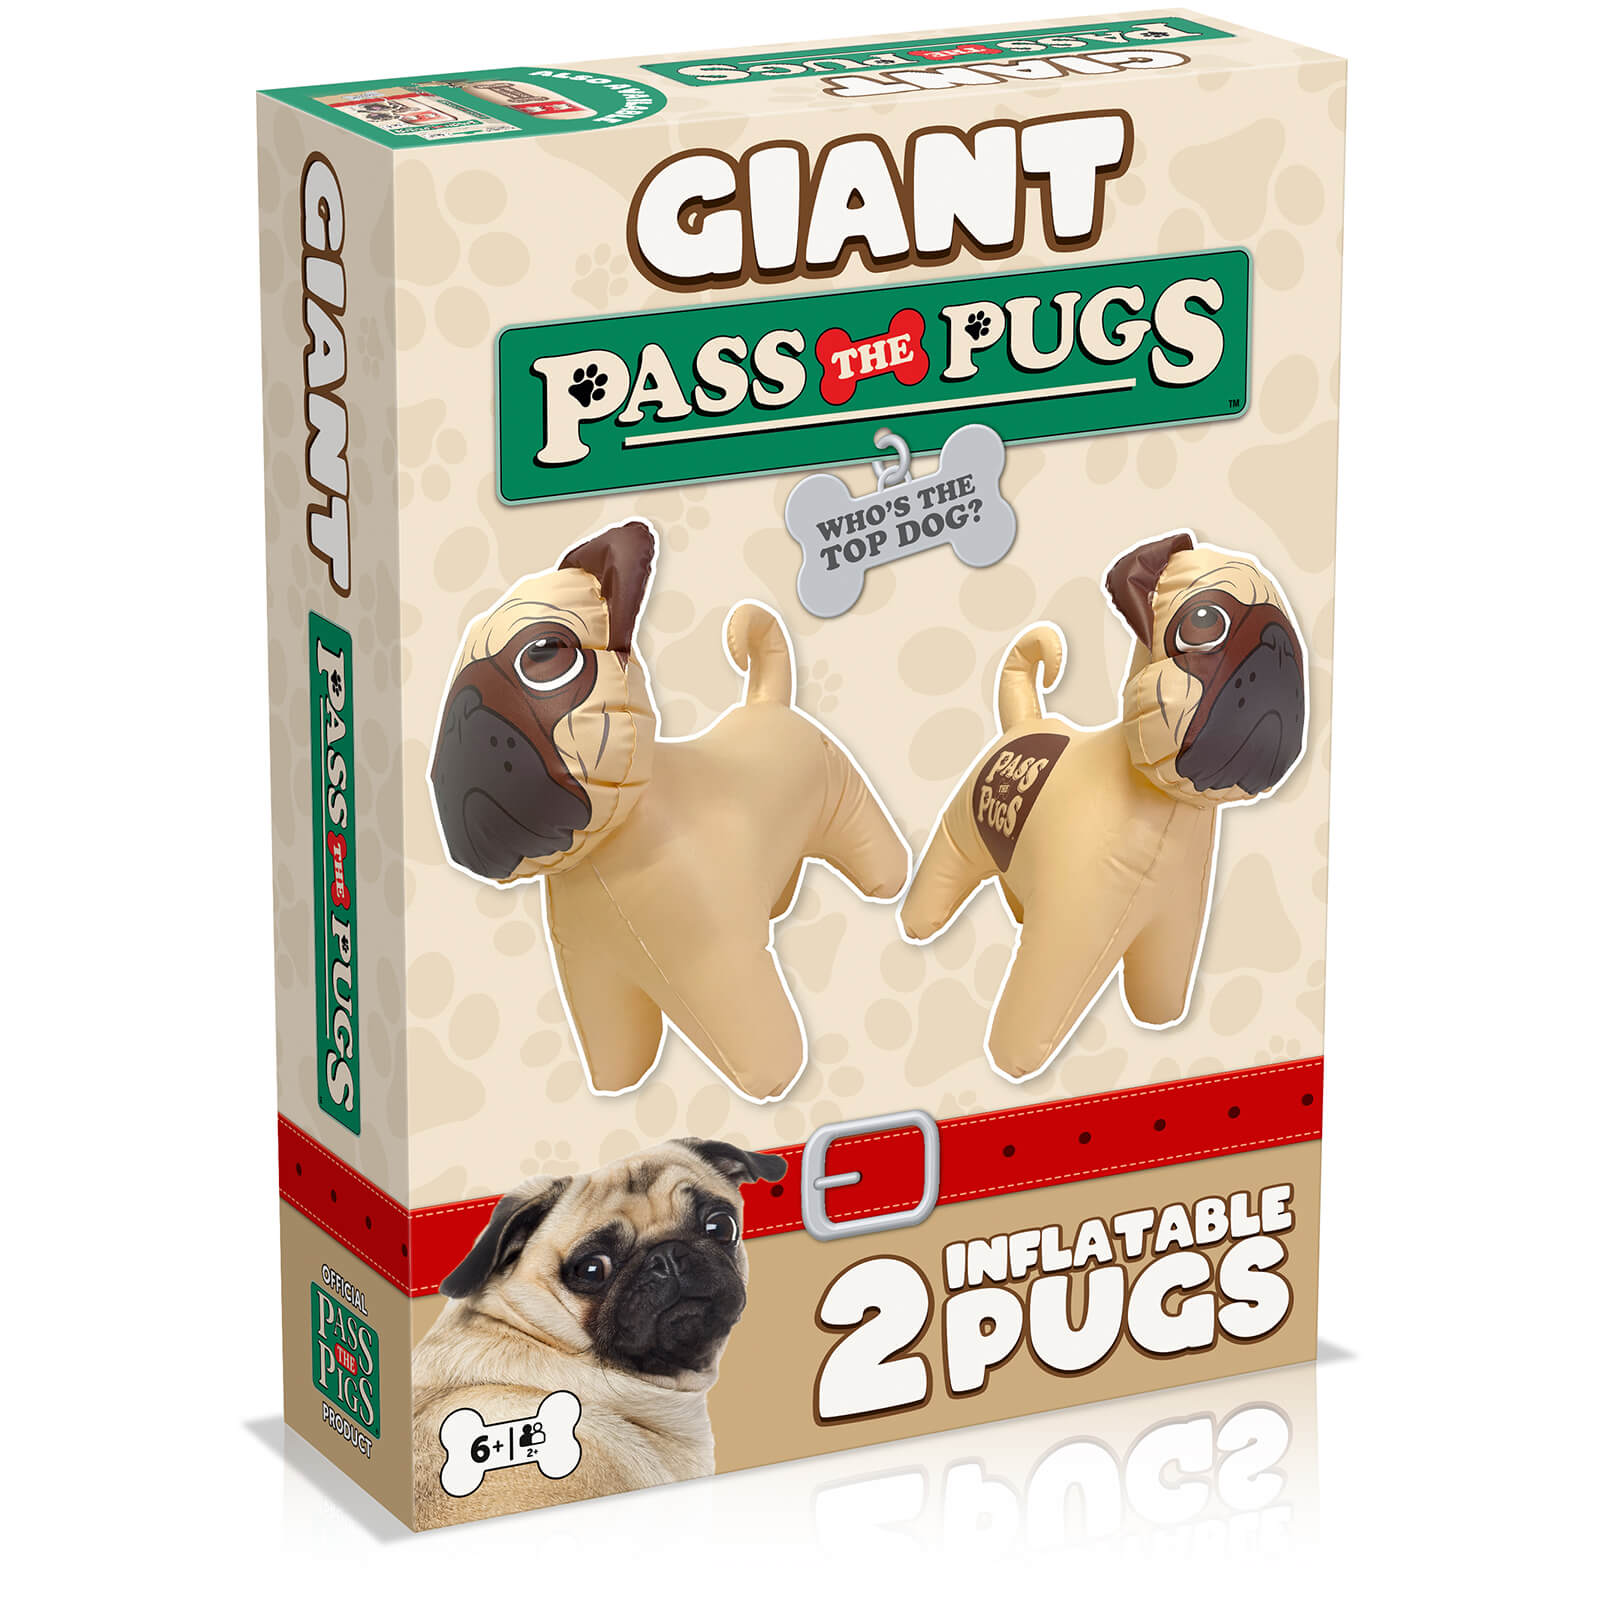 Image of Pass the Pugs - Giant Edition